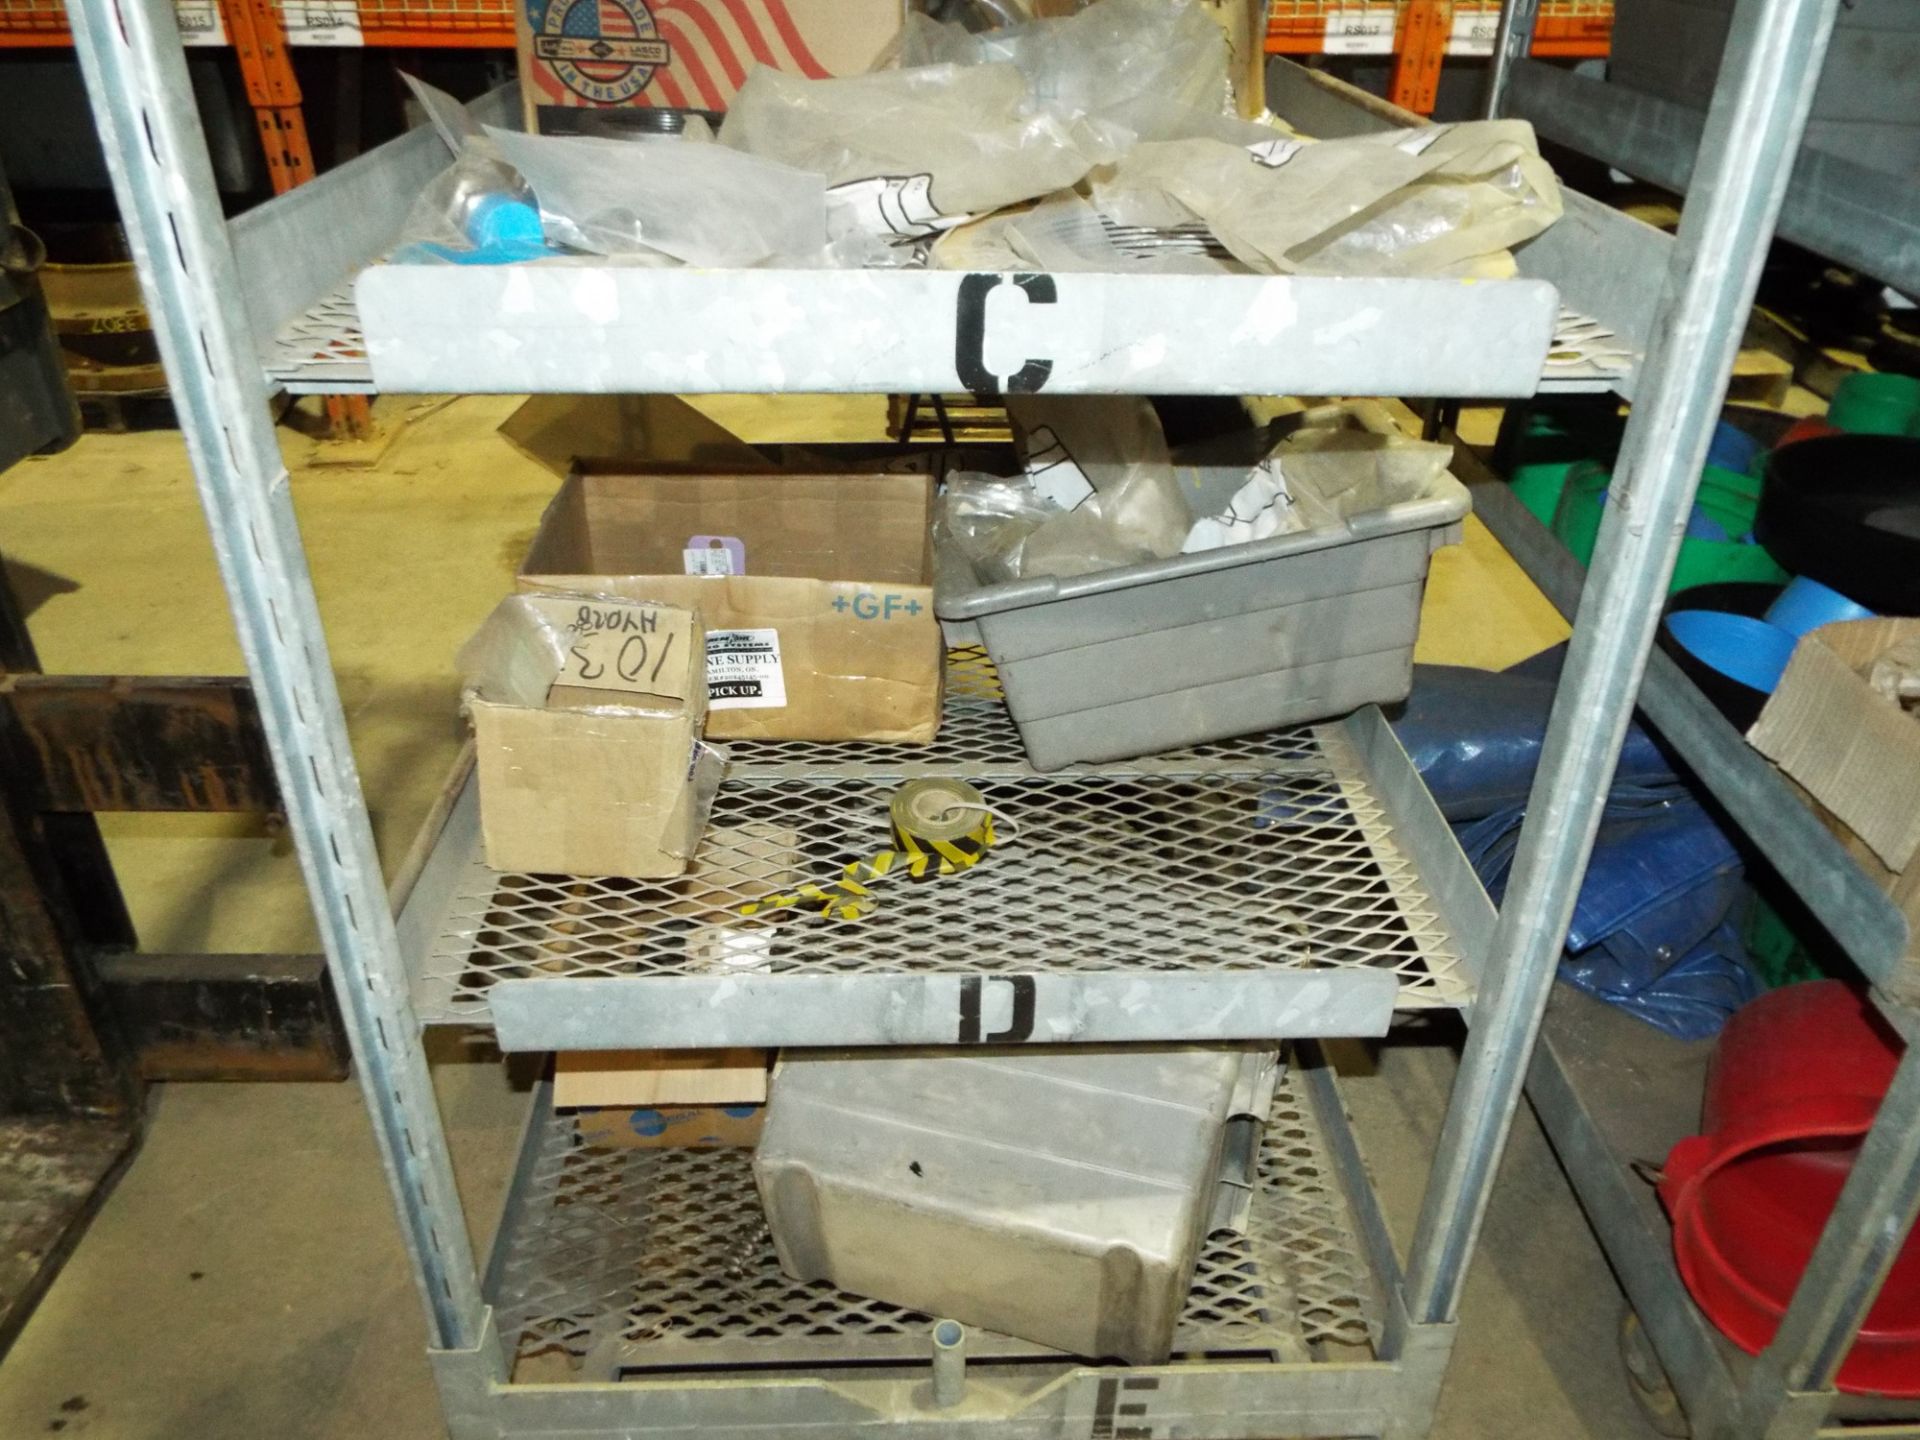 LOT/ ROLLING SHELF WITH CONTENTS - SPARE PARTS, HARDWARE AND SHOP SUPPLIES - Image 2 of 3